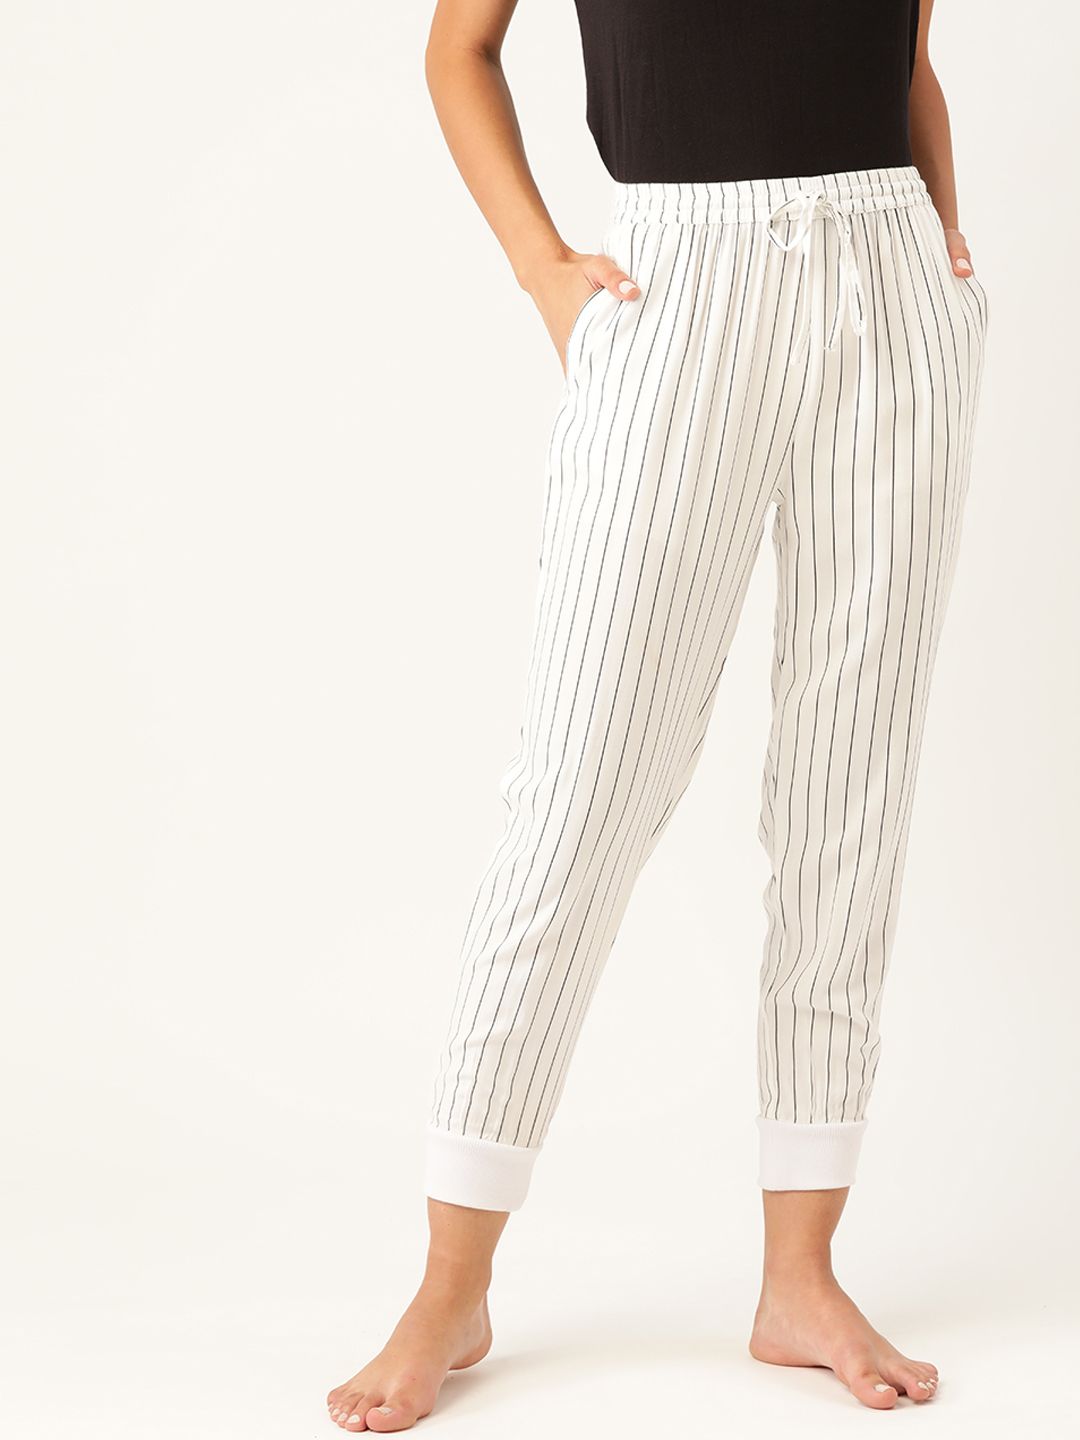 ETC Women White & Black Striped Joggers Lounge Pants Price in India